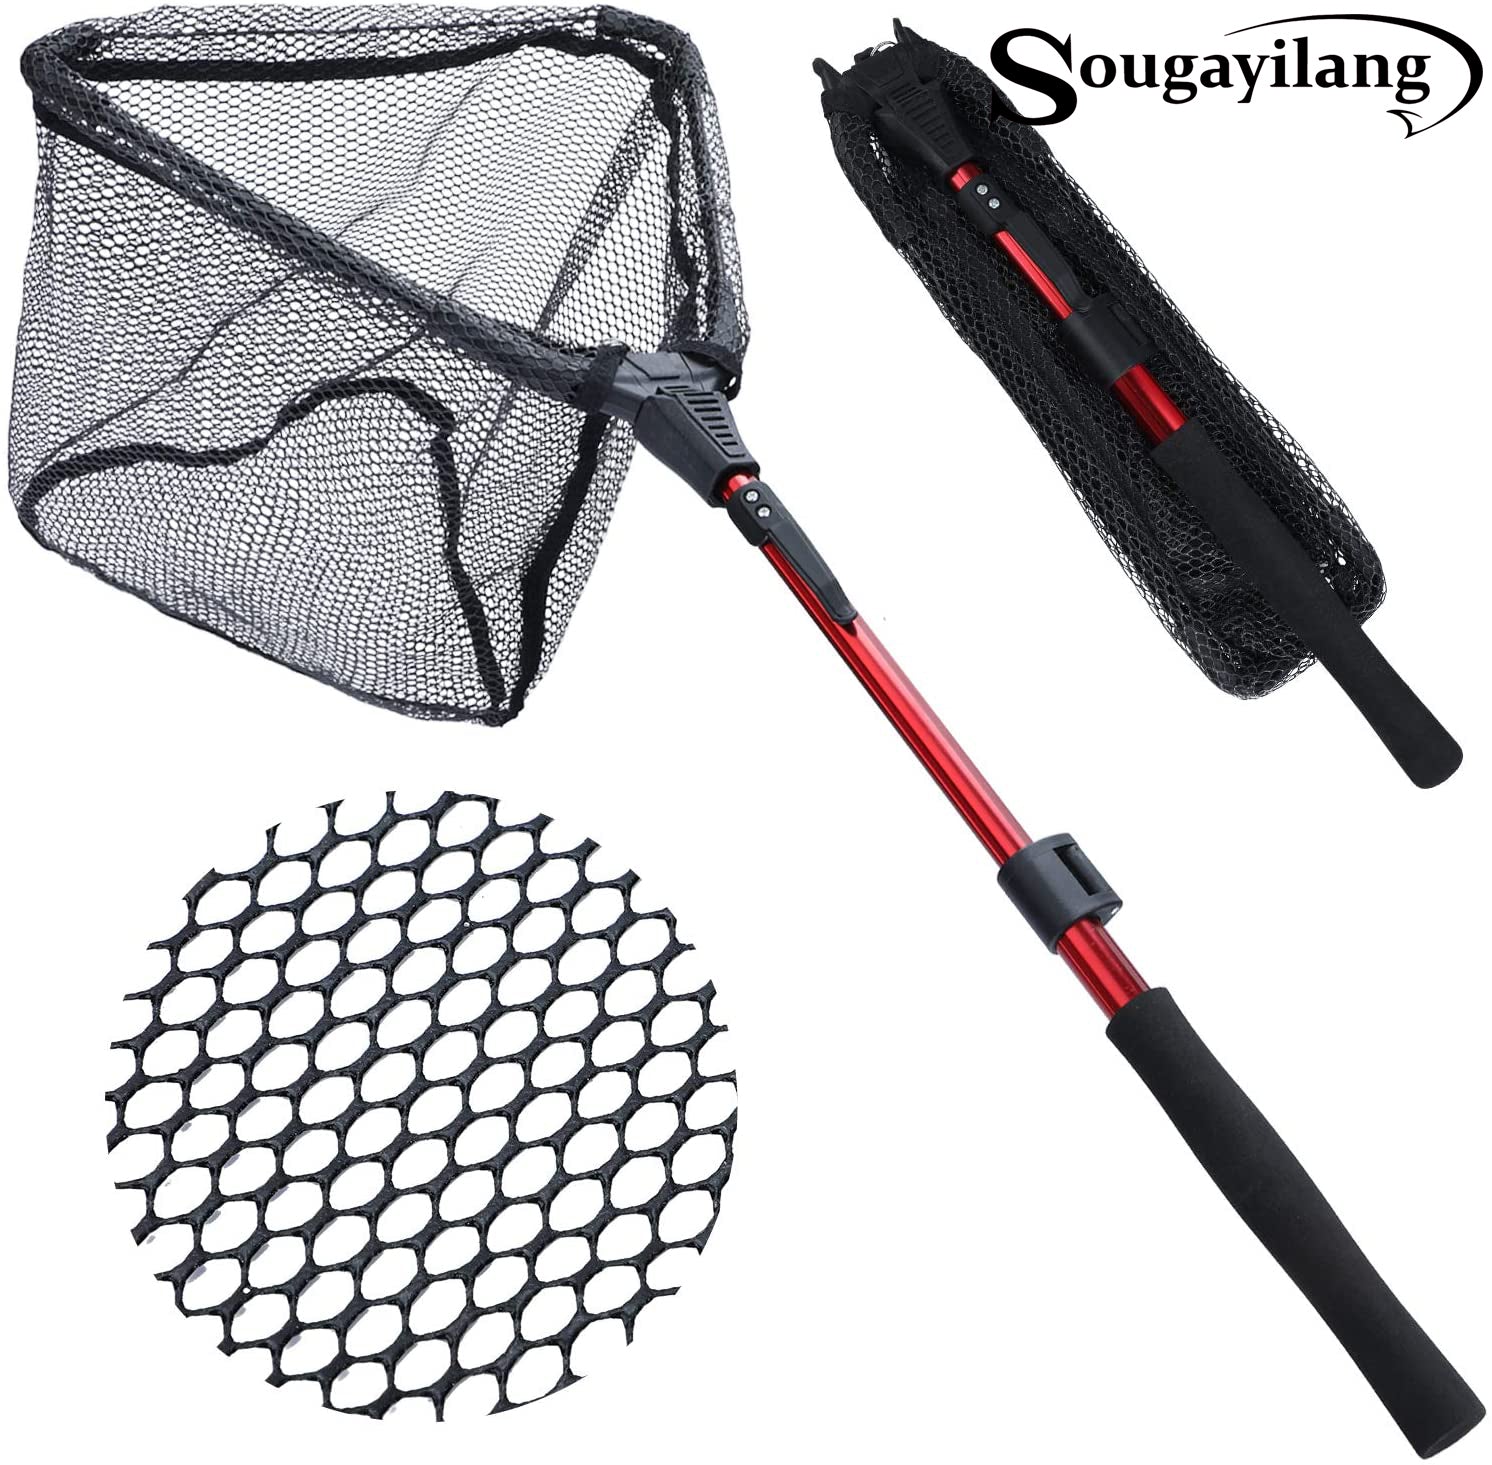 Sougayilang Fishing Net Fish Landing Net, Foldable Collapsible Telescopic  Pole with EVA Handle, Durable Nylon Material Mesh, Safe Fish Catching or